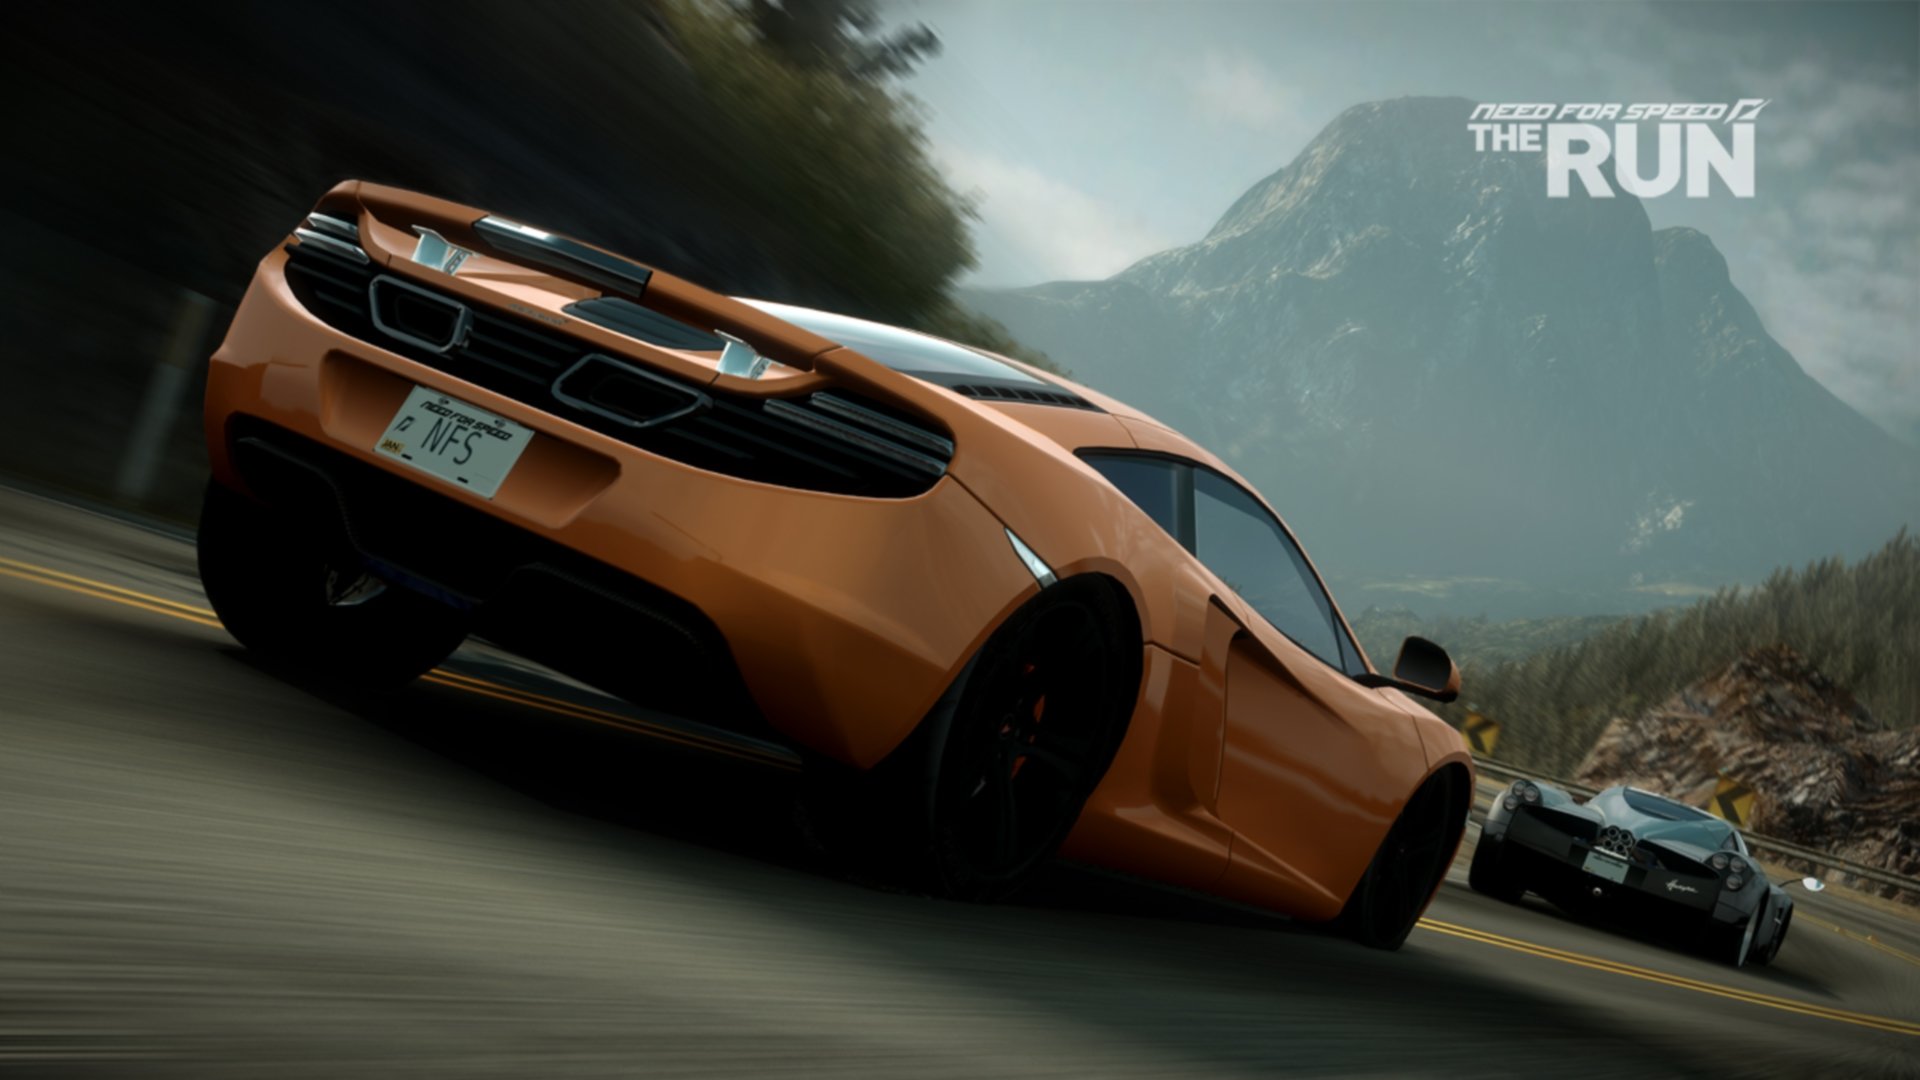 Best Need For Speed: The Run wallpaper ID:215998 for High Resolution hd 1920x1080 desktop